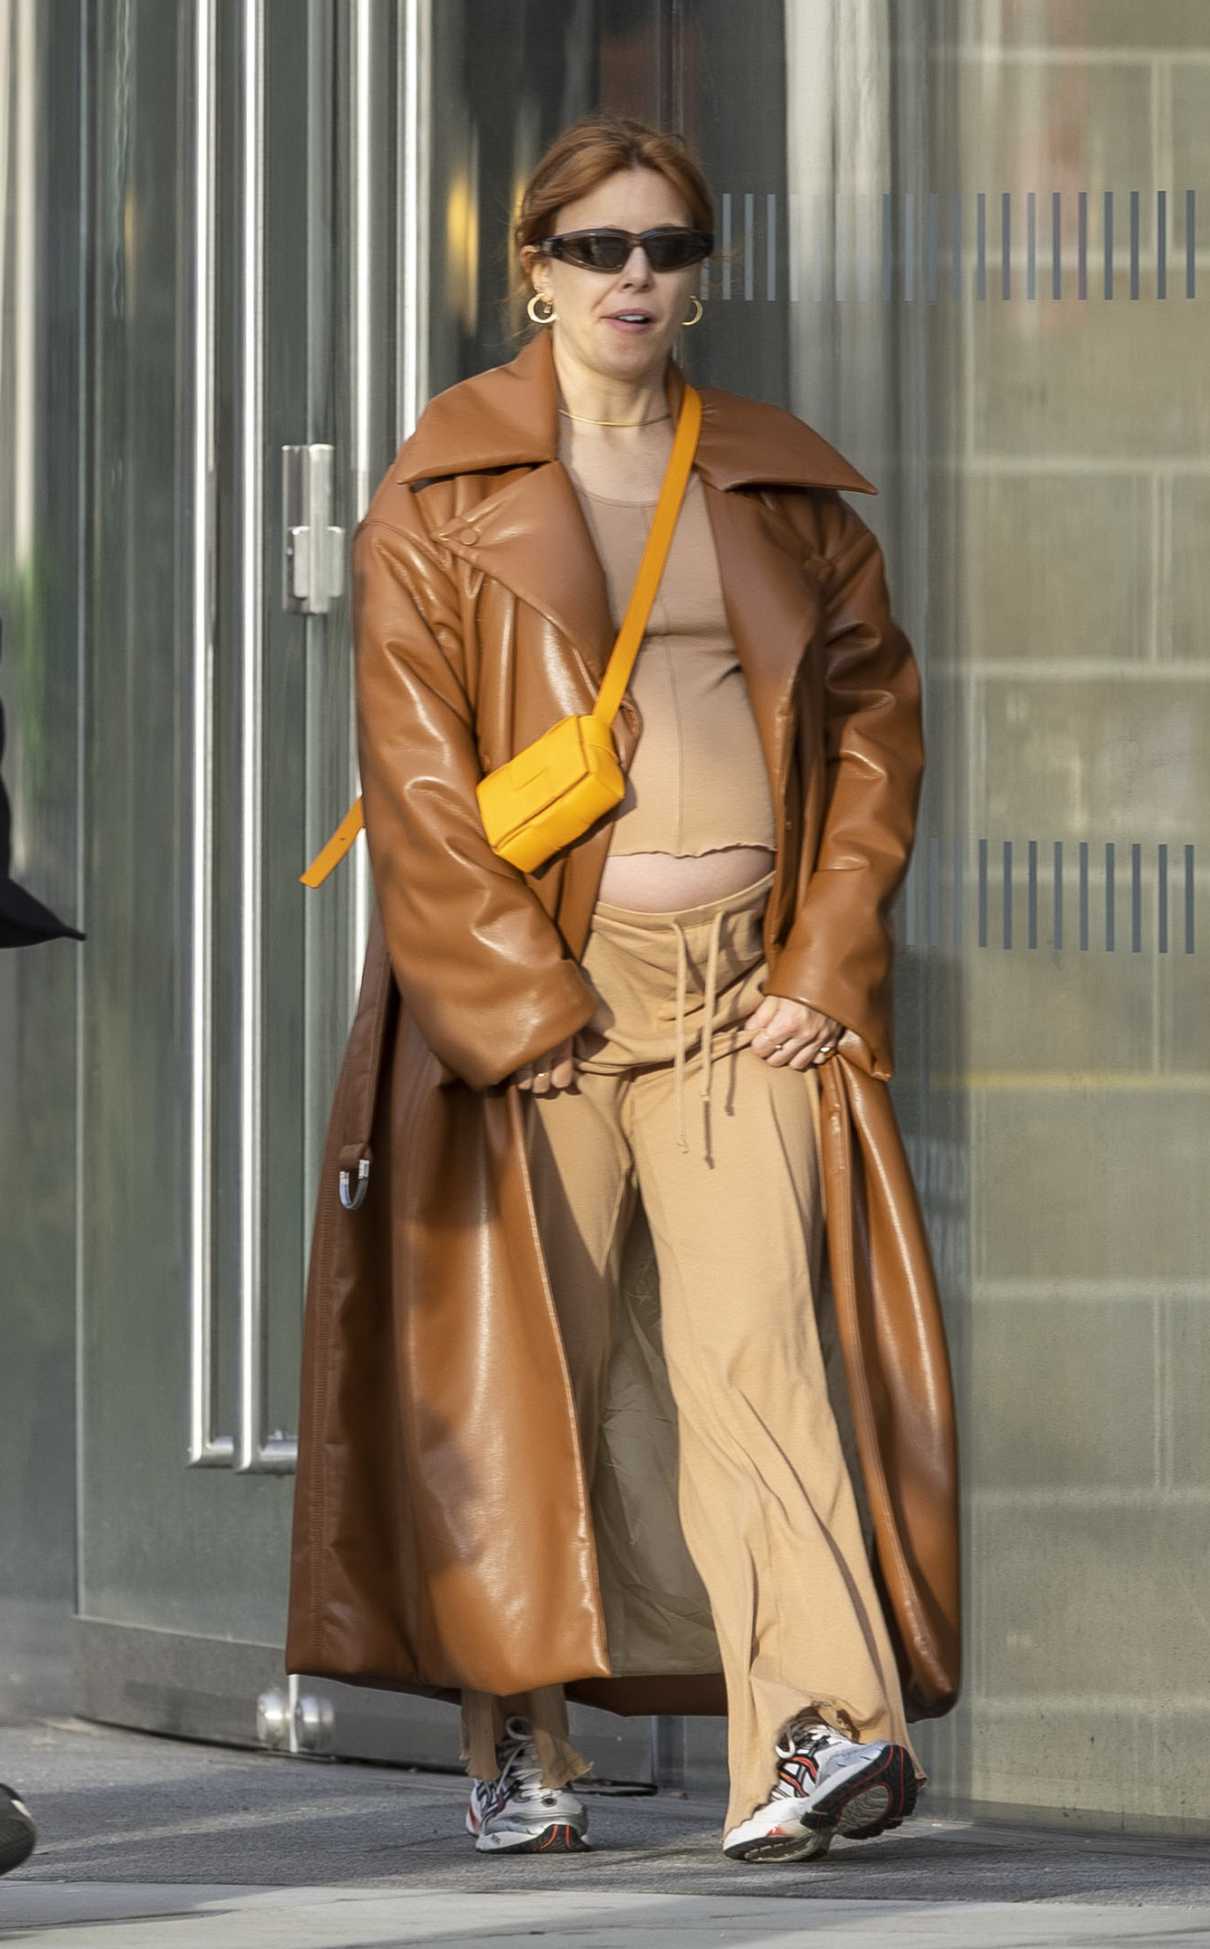 Stacey Dooley in a Tan Coat